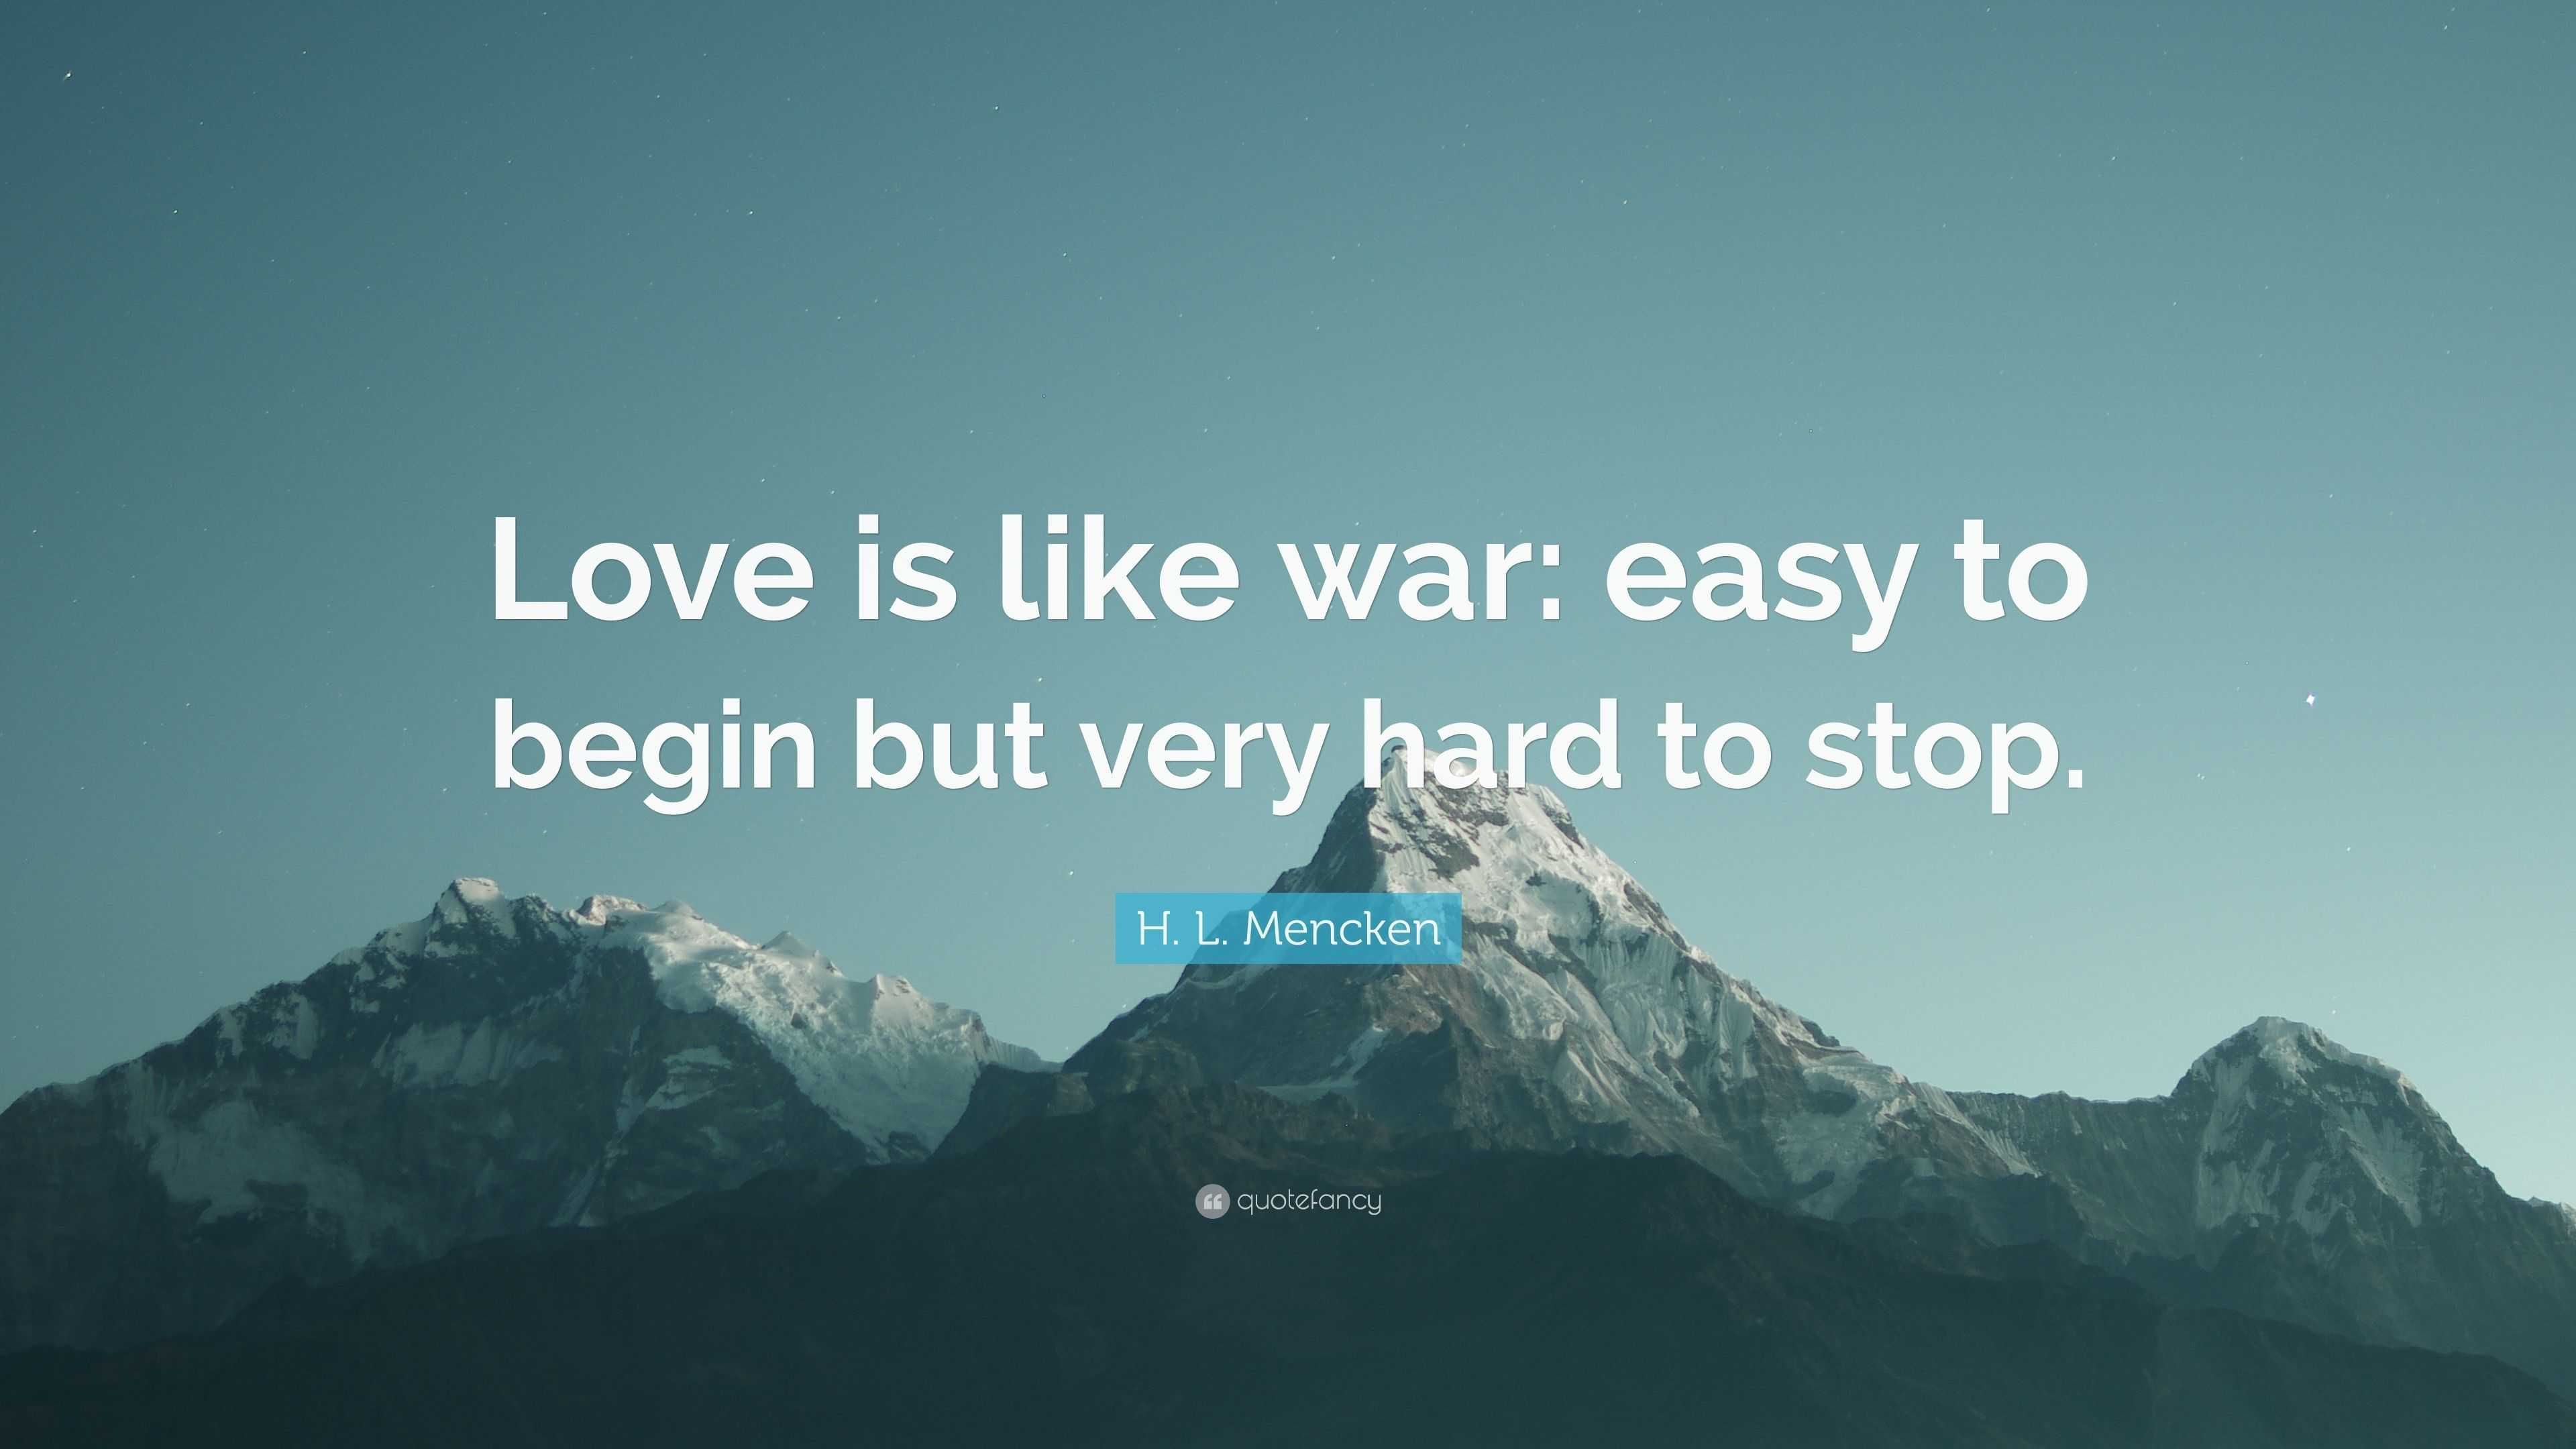 H L Mencken Quote “Love is like war easy to begin but very hard